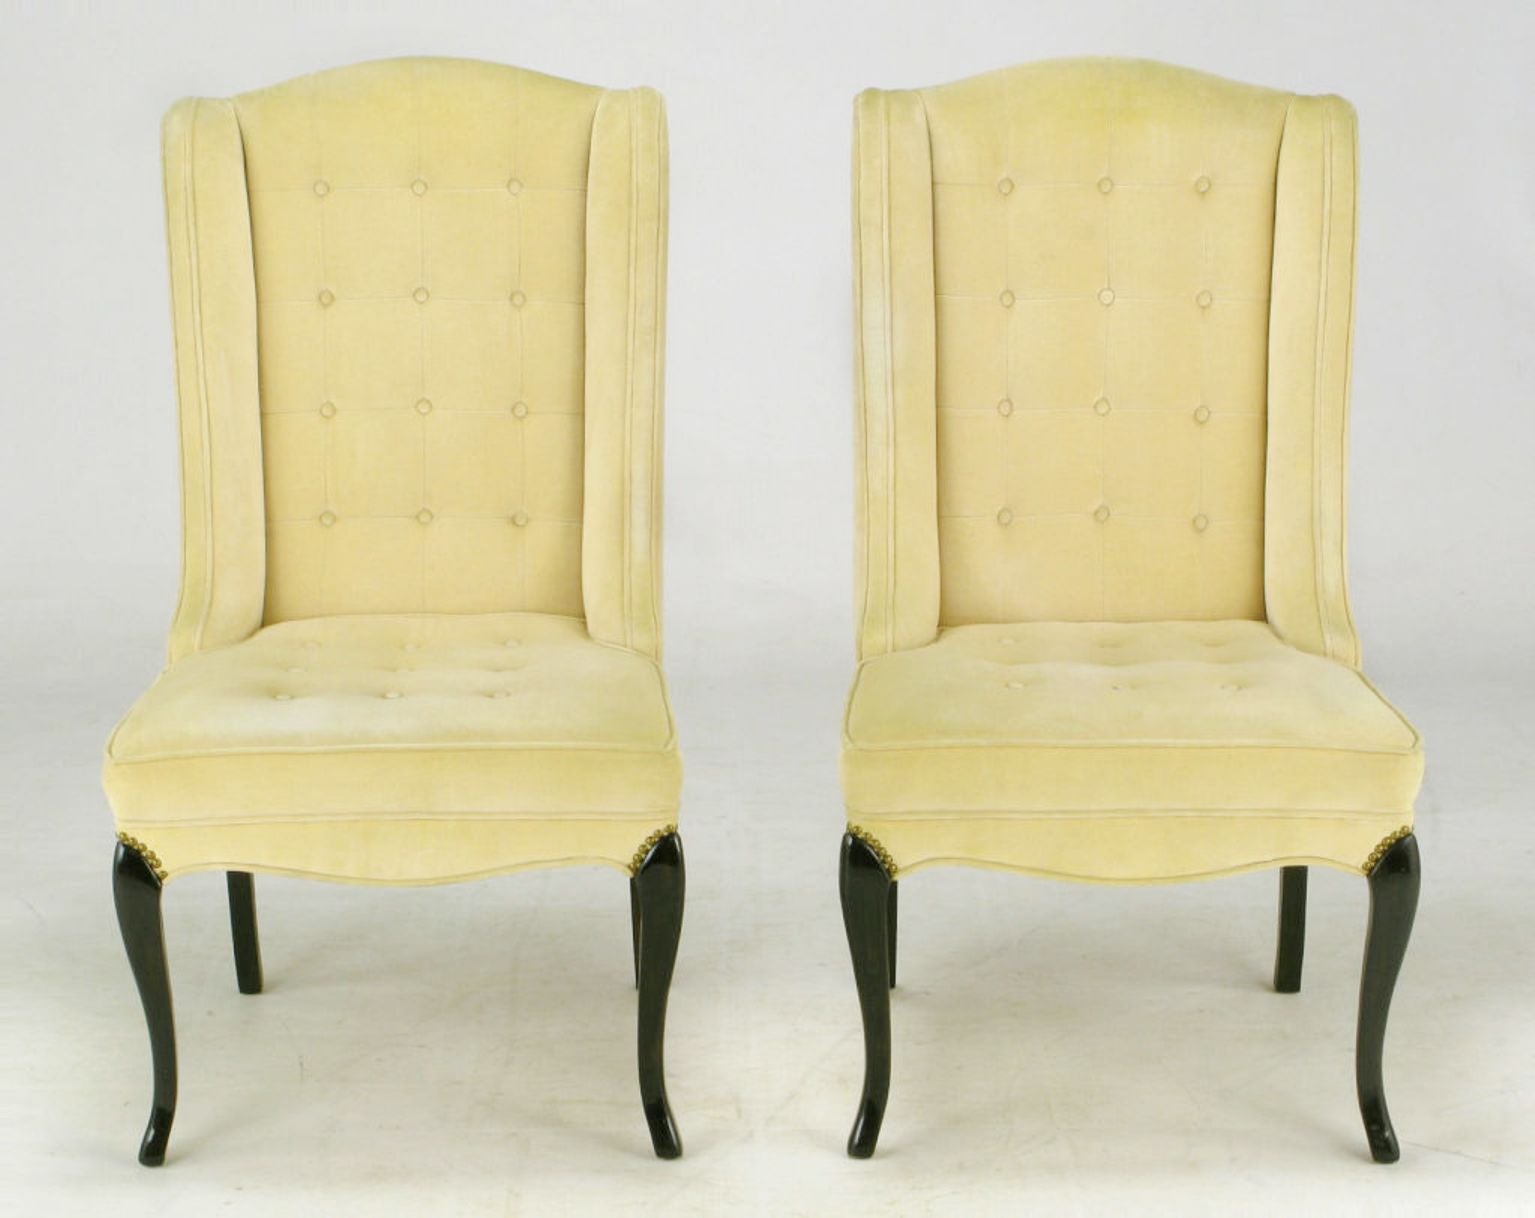 Pair of 1940s Creamy Velvet Button Tufted Slipper Chairs